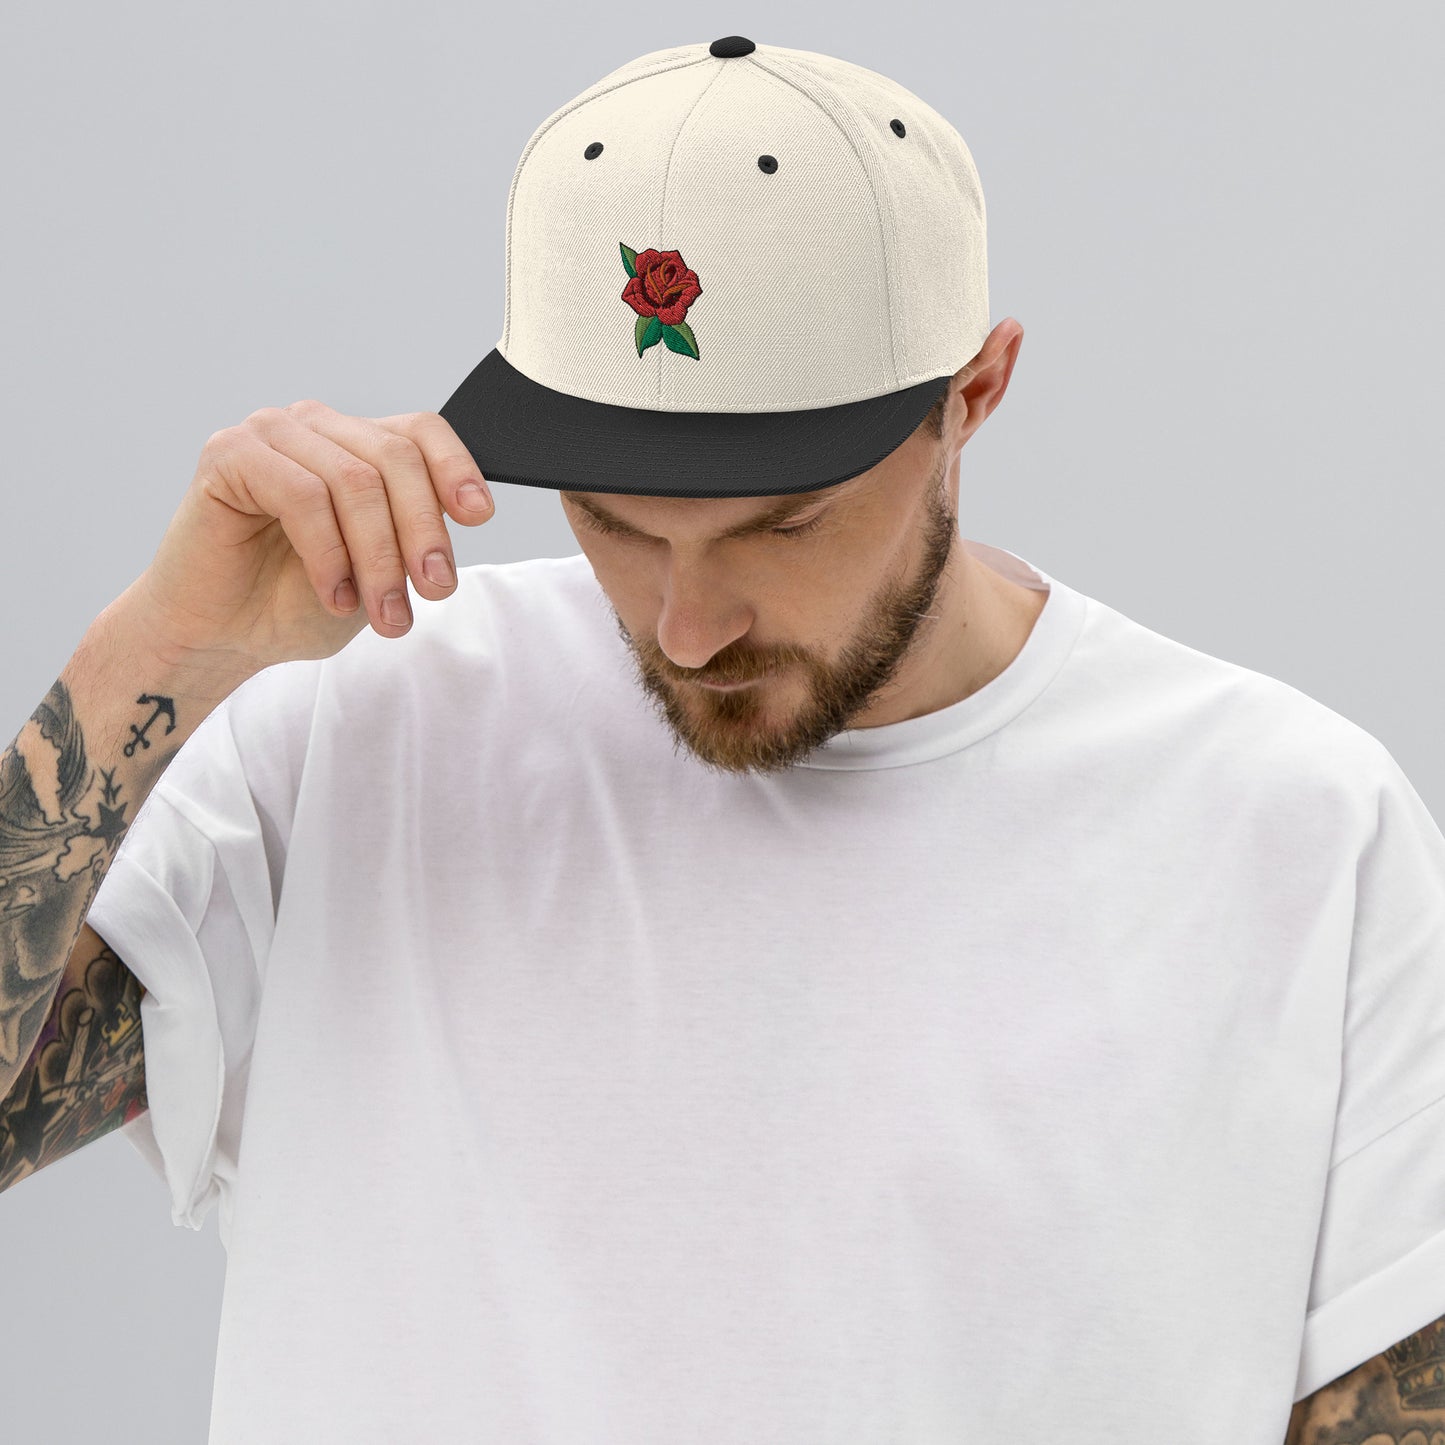 Neo rose embroidered Snapback